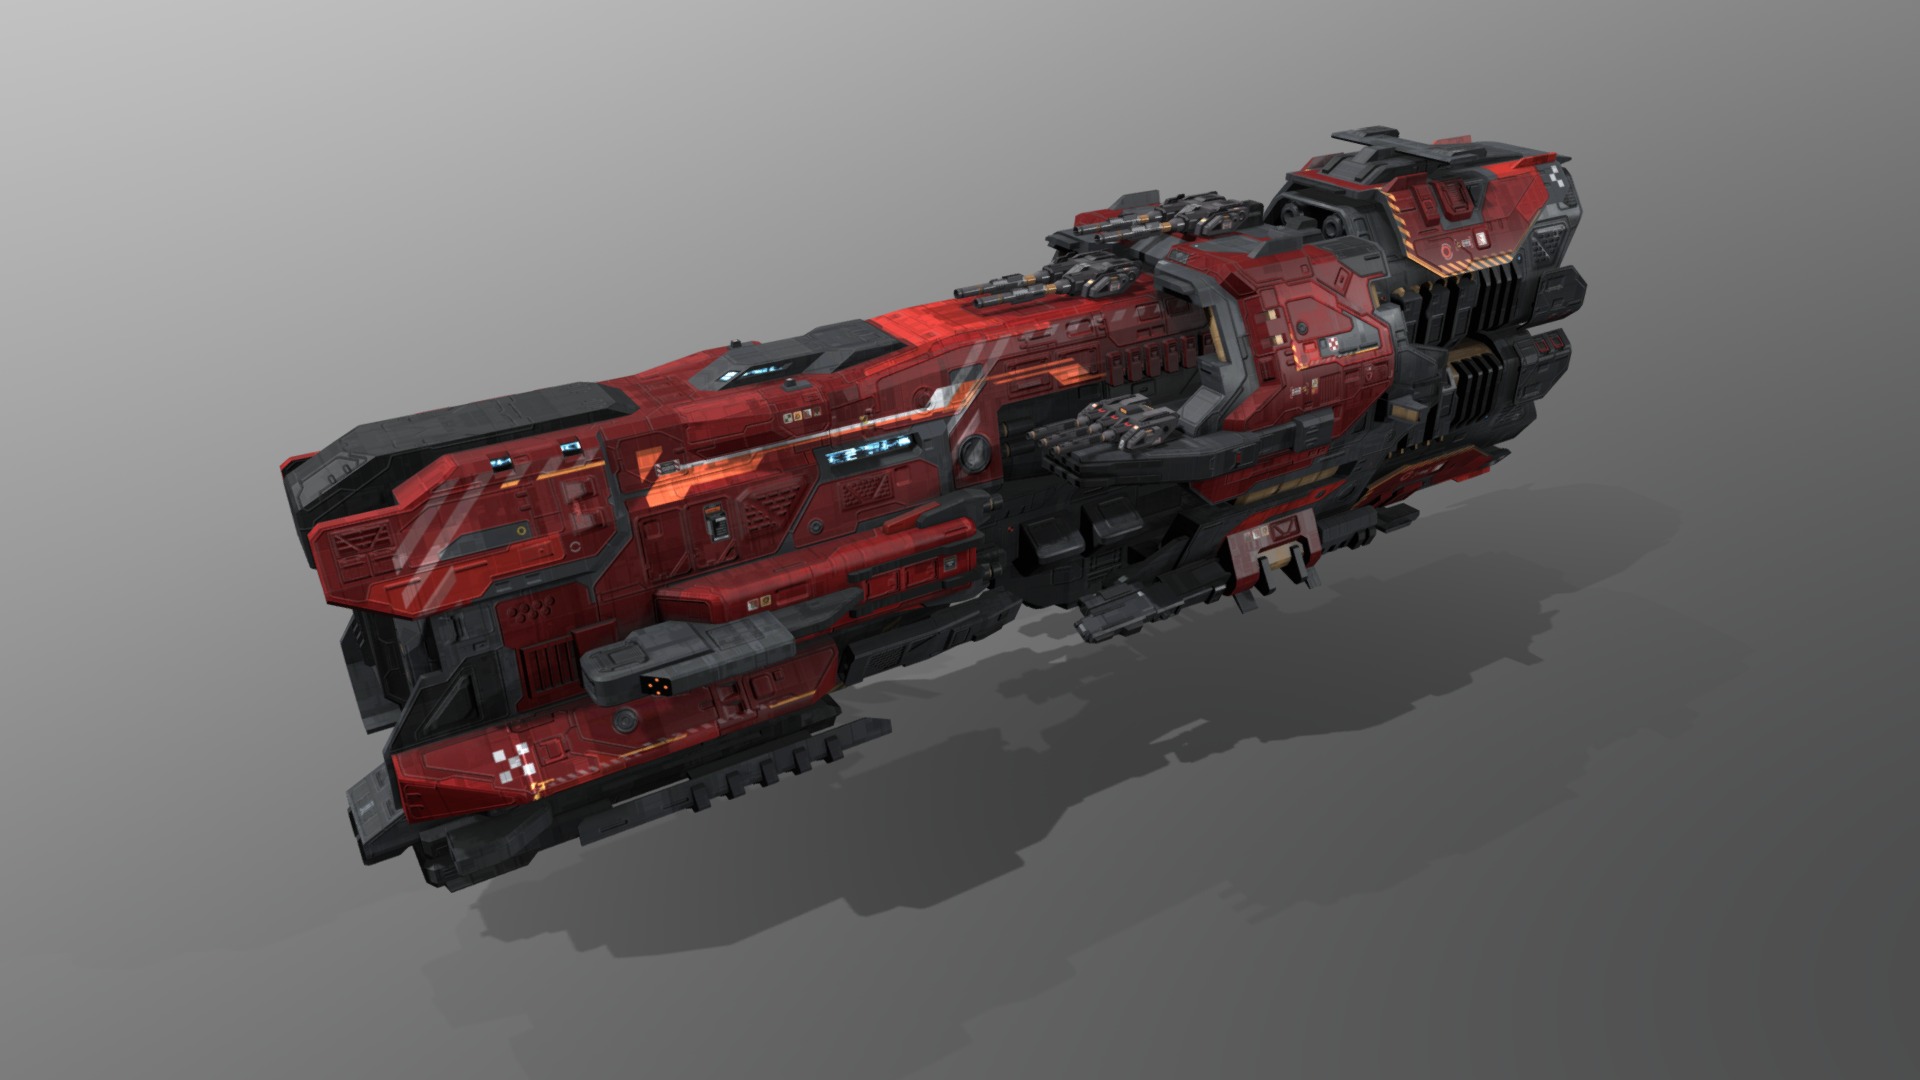 3D model Destroyer GX4 - This is a 3D model of the Destroyer GX4. The 3D model is about a red toy on a surface.